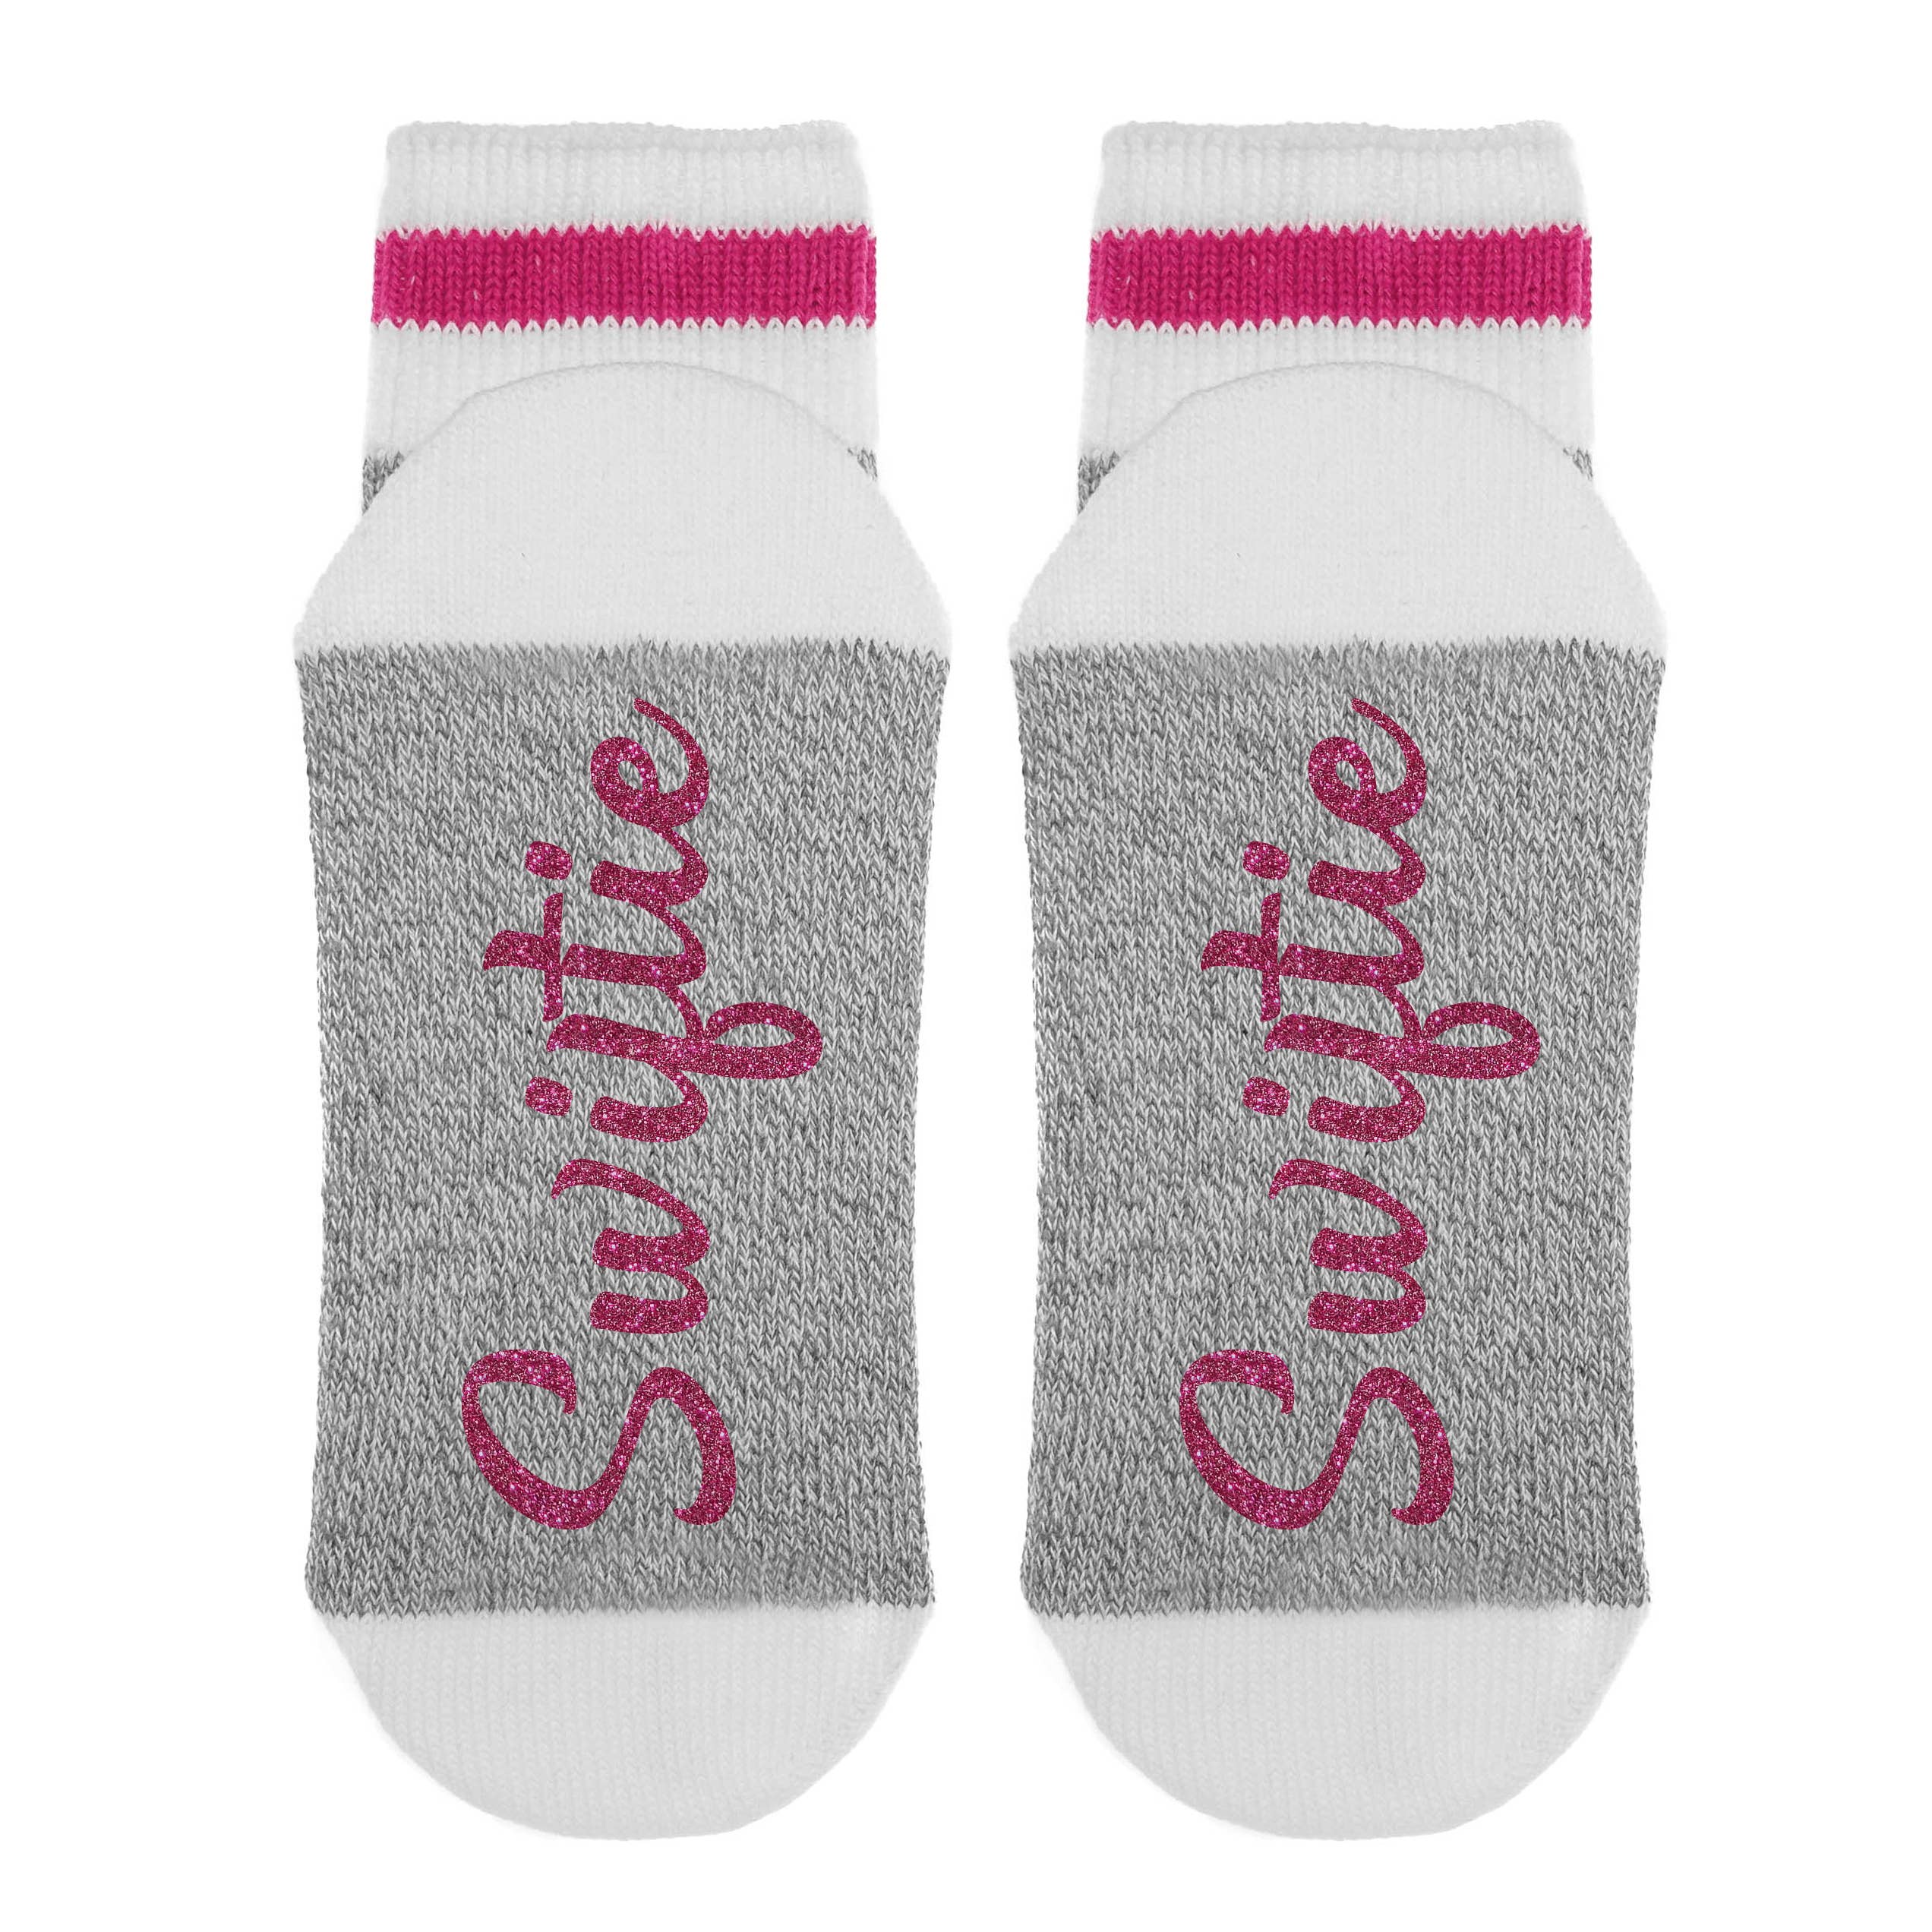 Purchase Wholesale taylor swift socks. Free Returns & Net 60 Terms on Faire